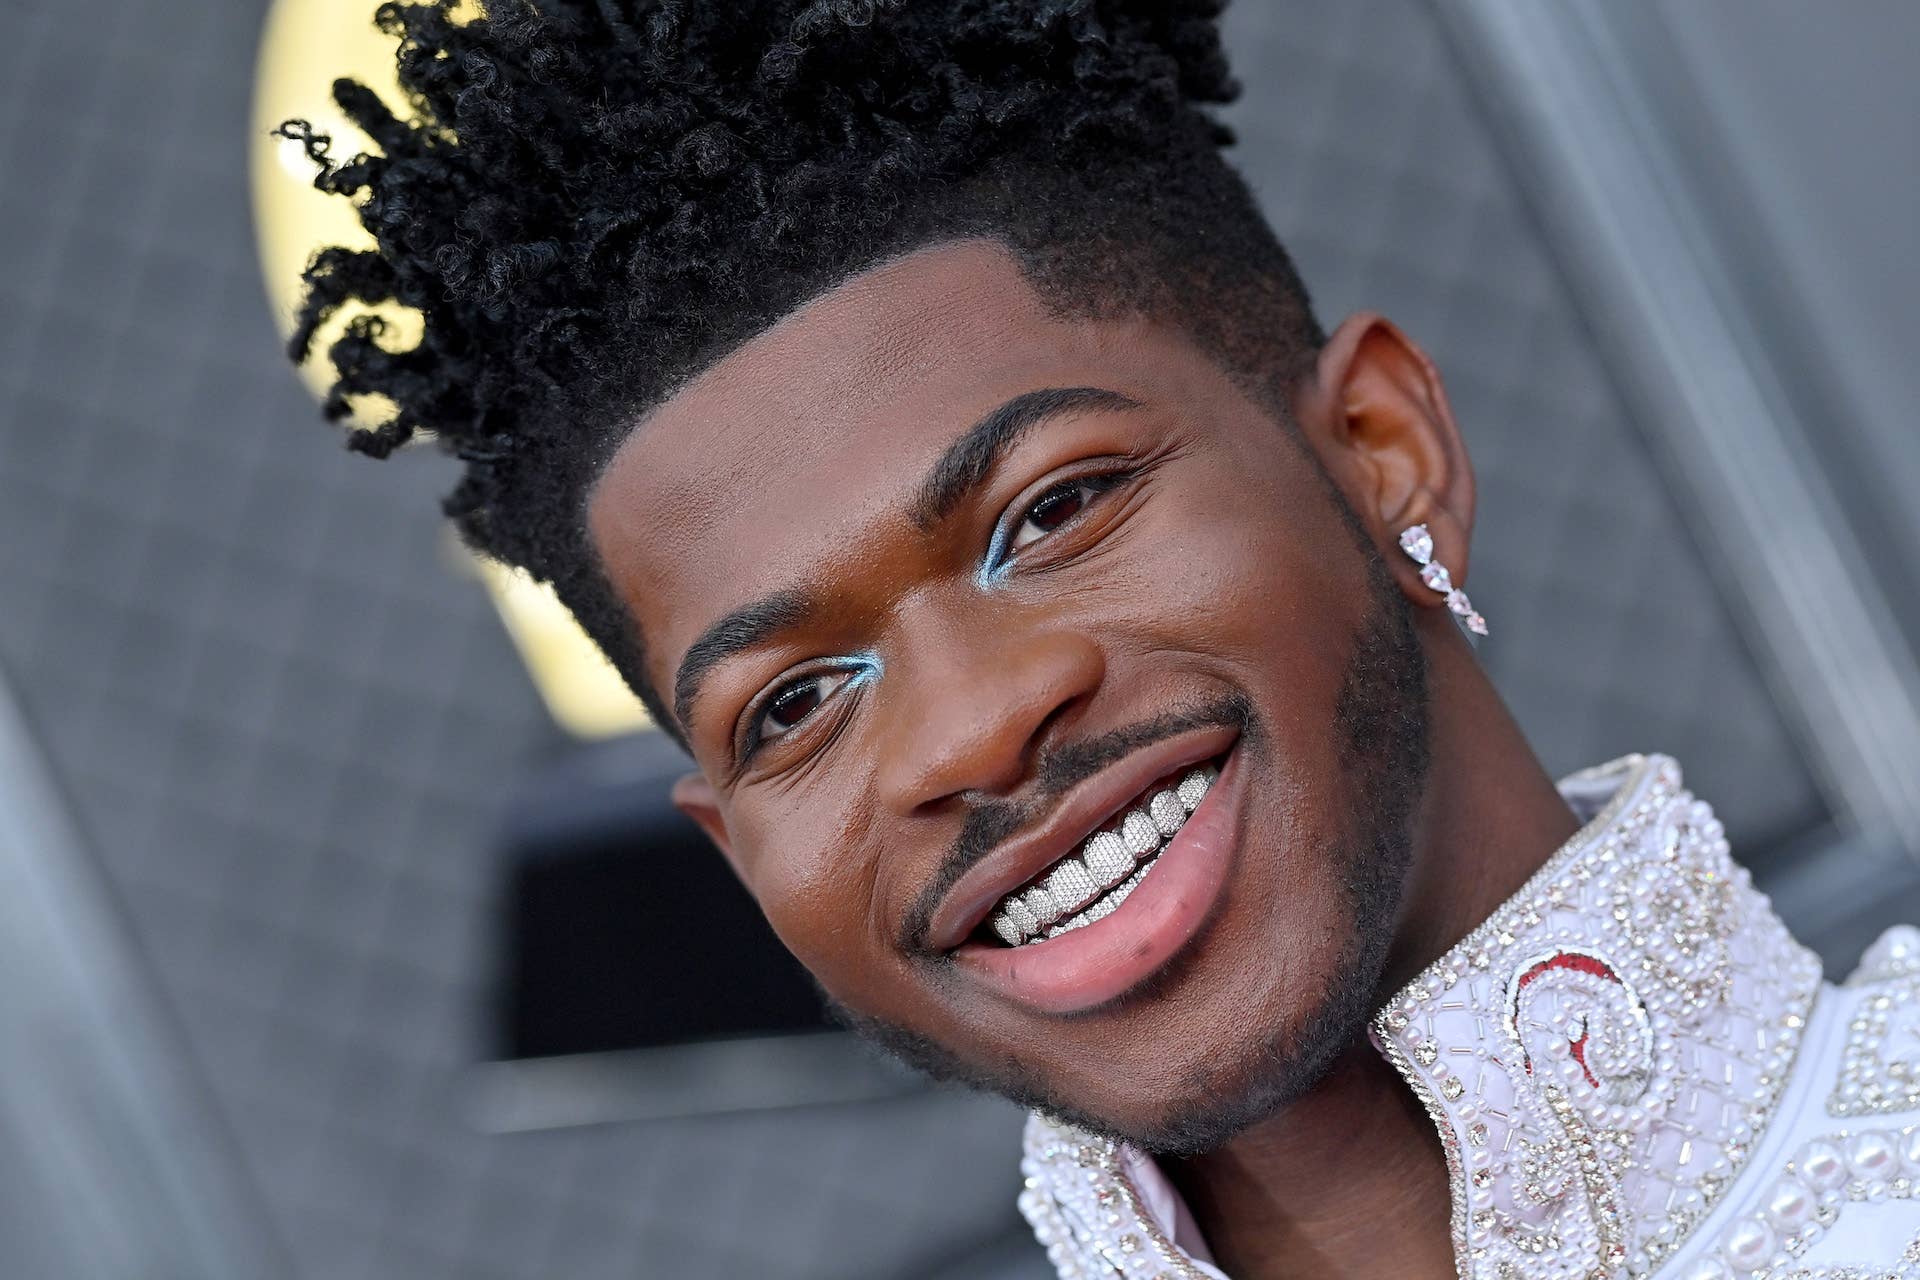 Lil Nas X attends the 64th Annual Grammy Awards